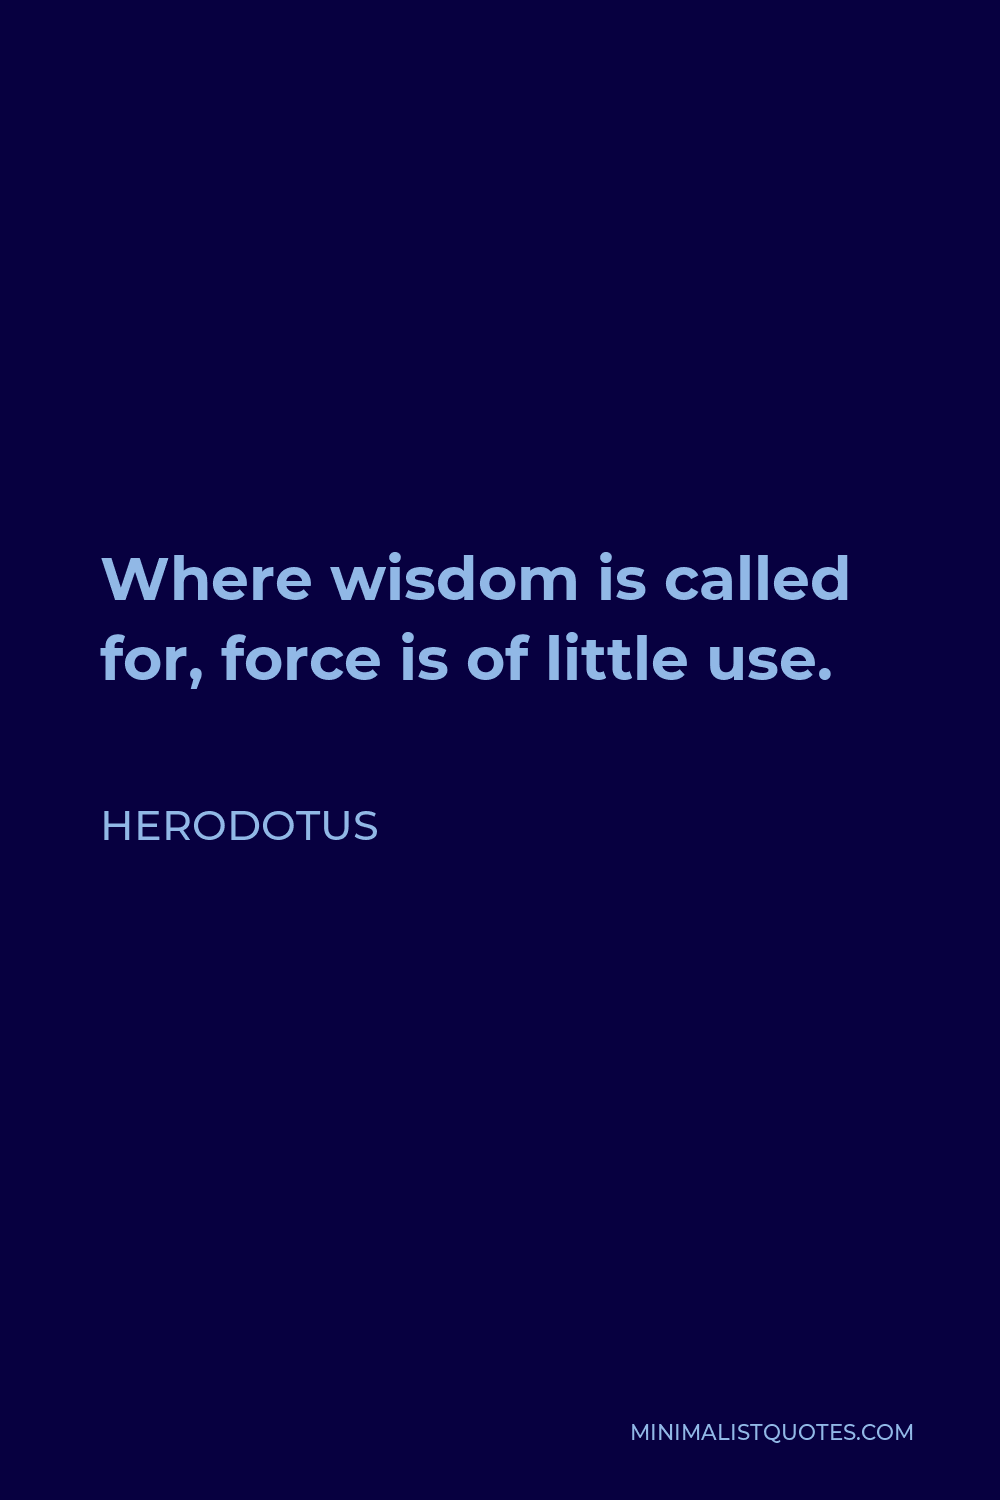 Herodotus Quote - Where wisdom is called for, force is of little use.